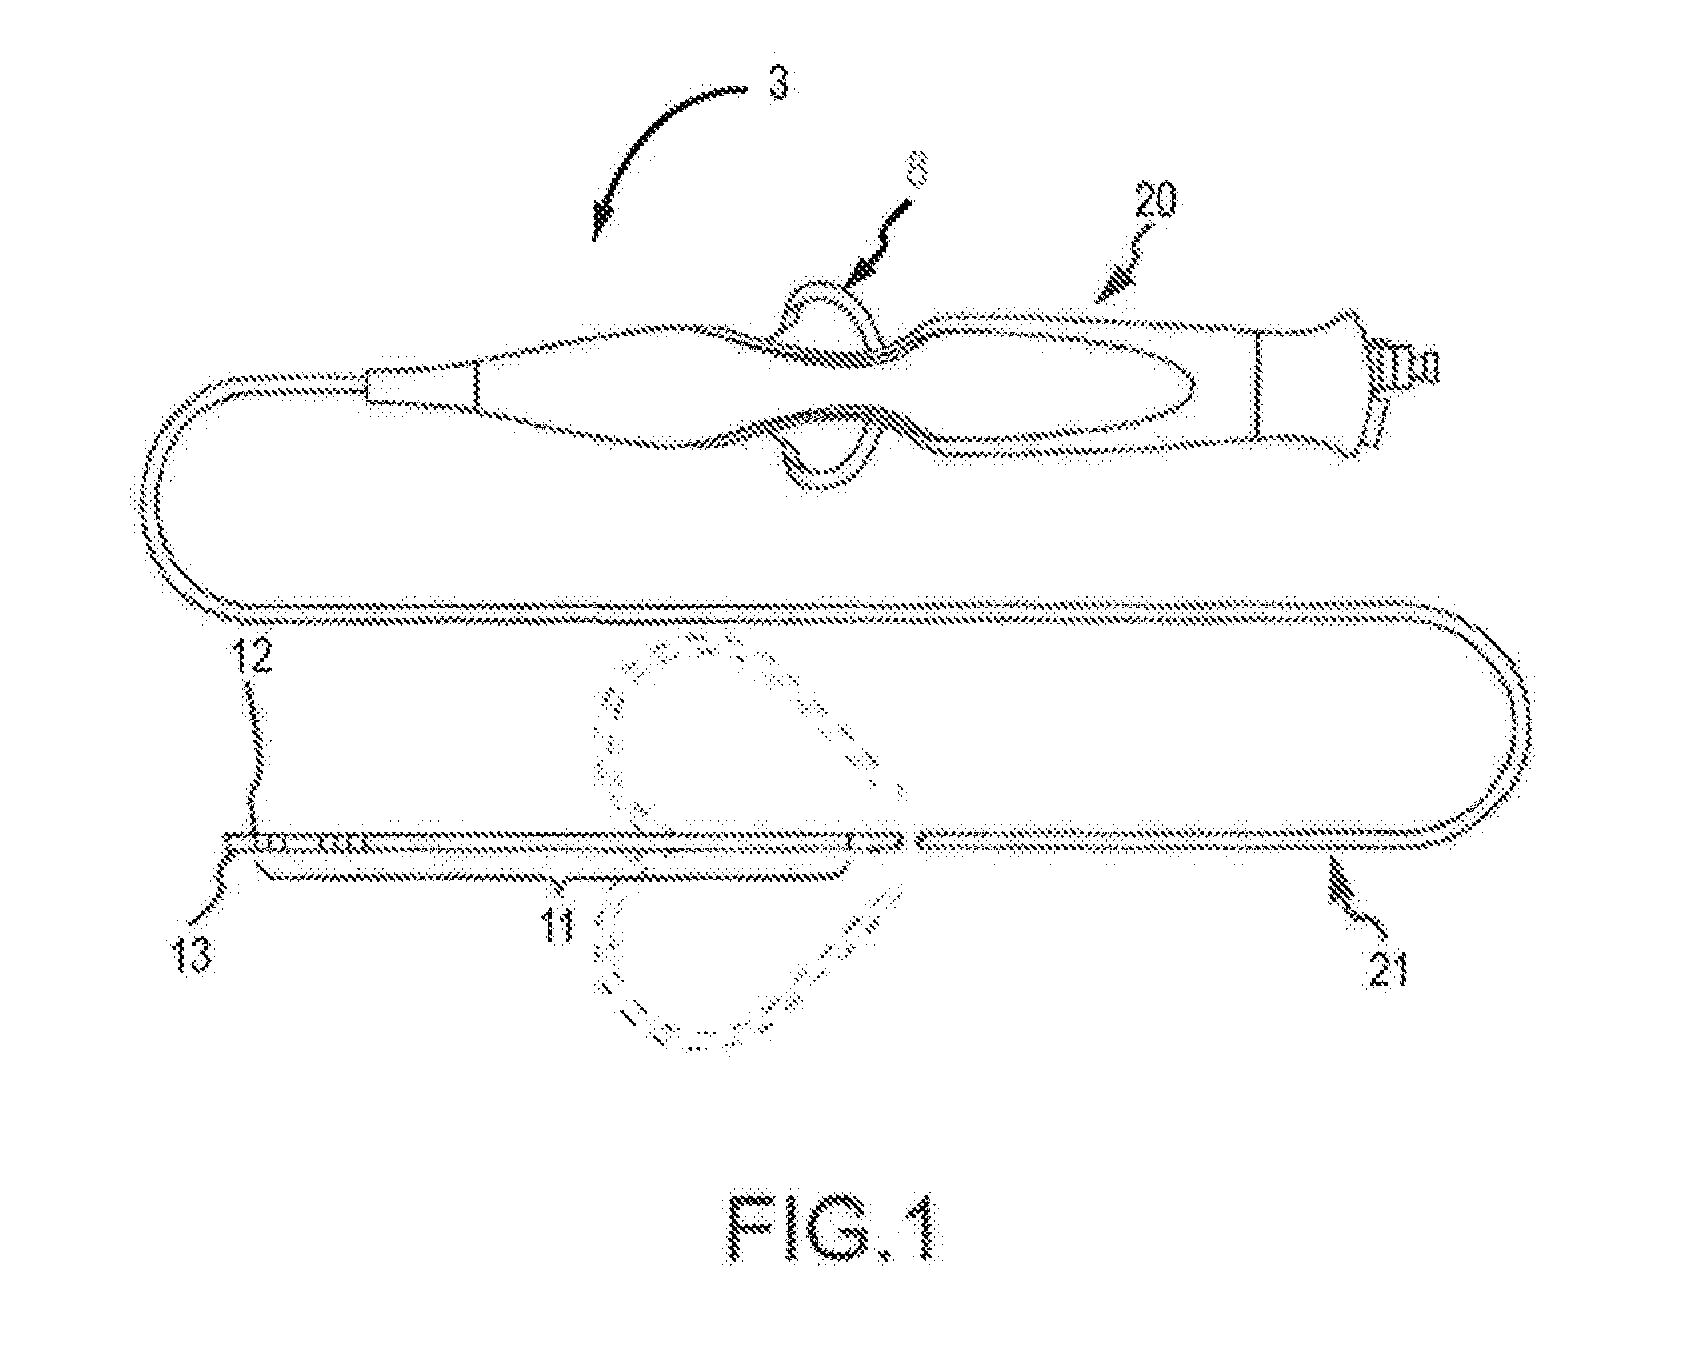 Deflectable Catheter Bodies with Corrugated Tubular Structures